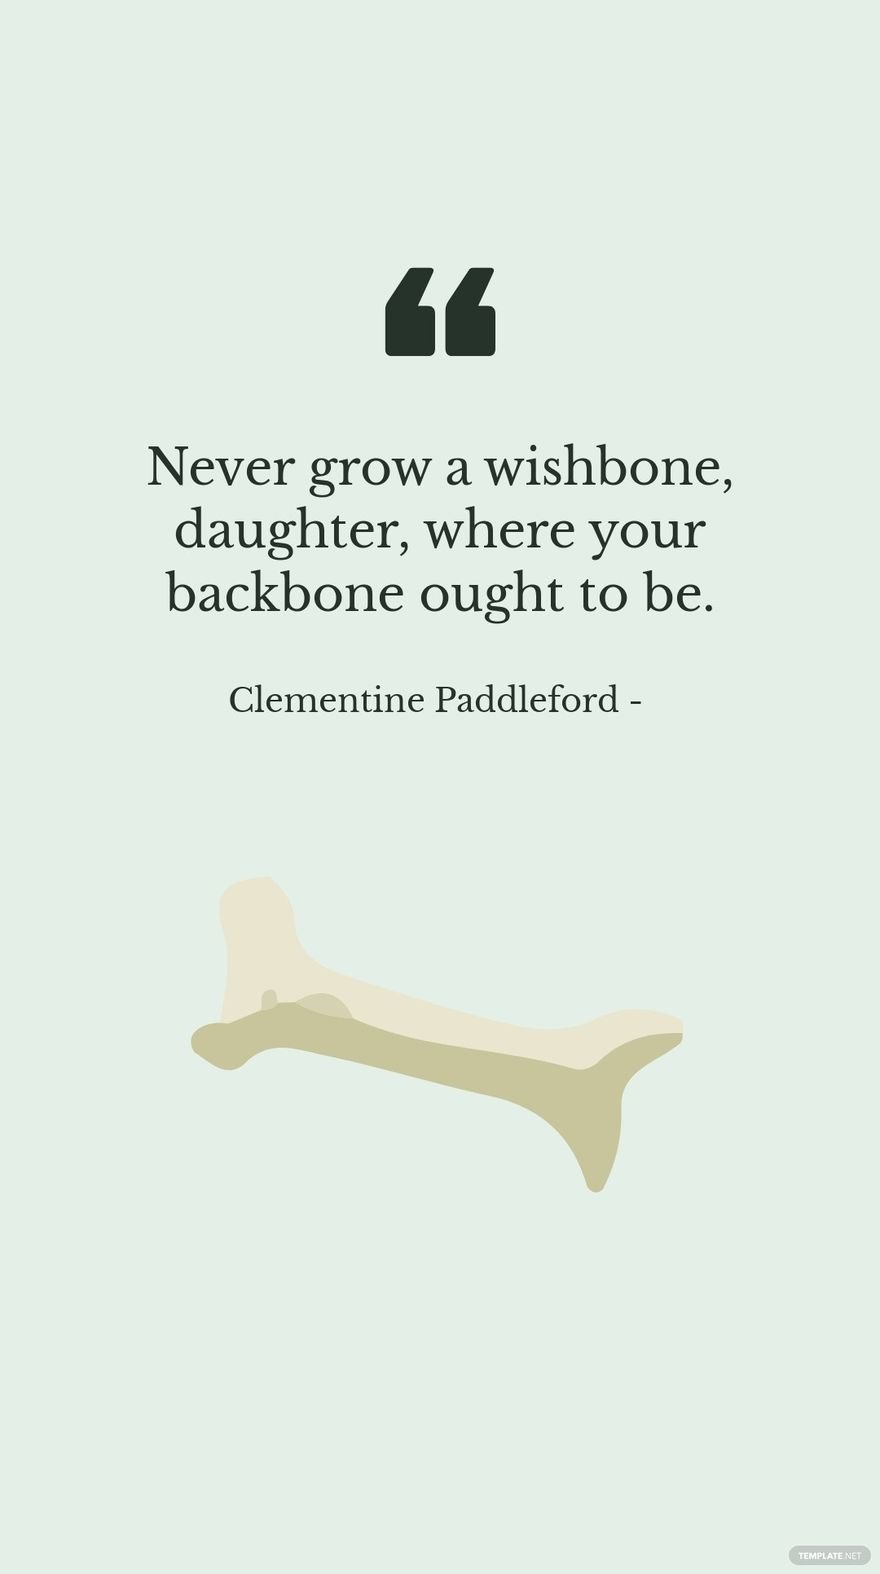 Free Clementine Paddleford - Never grow a wishbone, daughter, where your backbone ought to be.